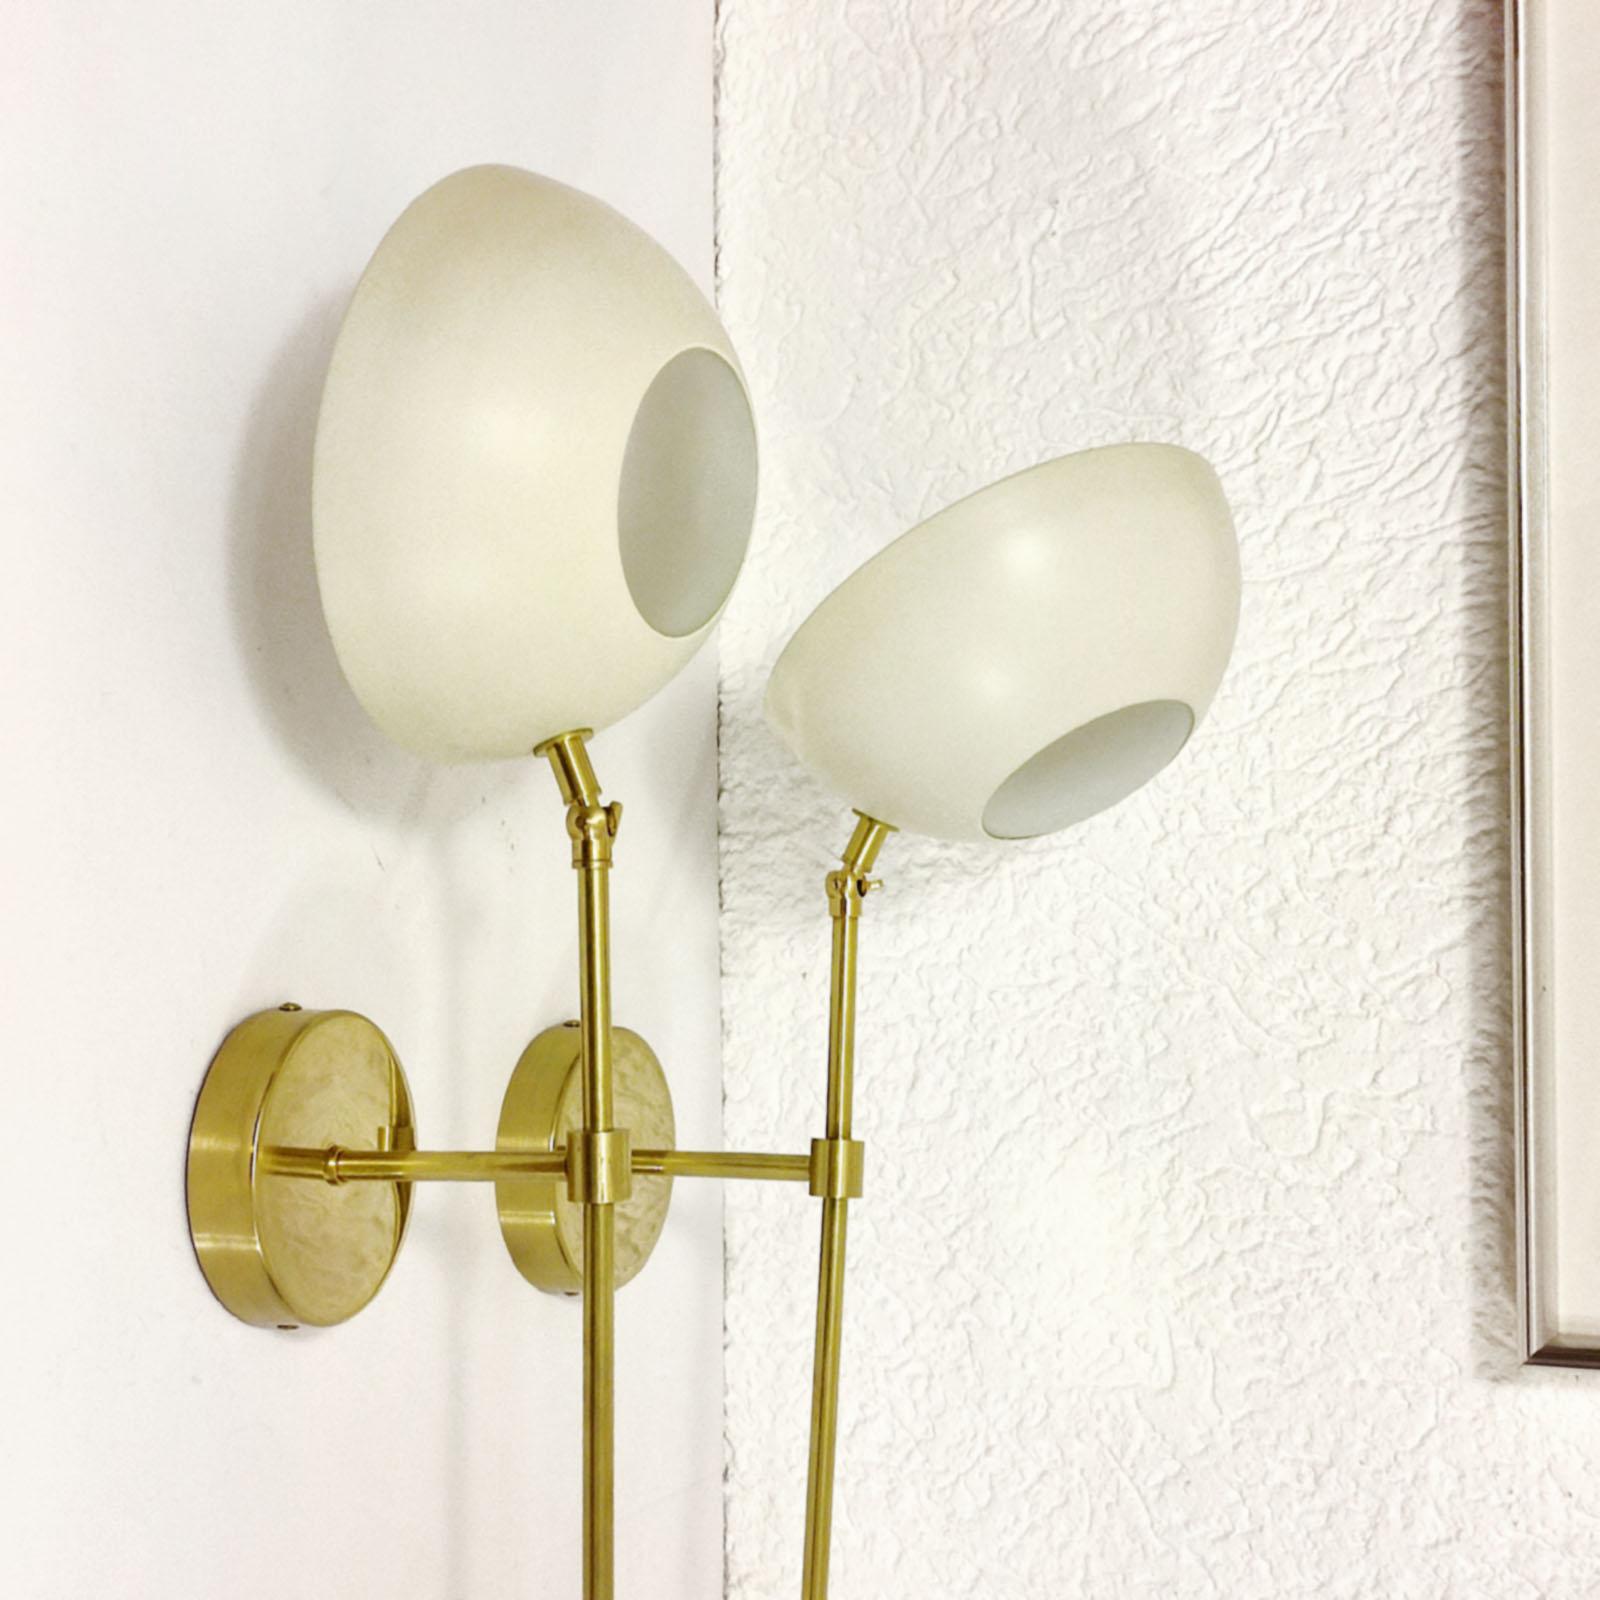 Pair of Italian Wall Lights, Brass and Ivory Lacquer, Stilnovo Style For Sale 7